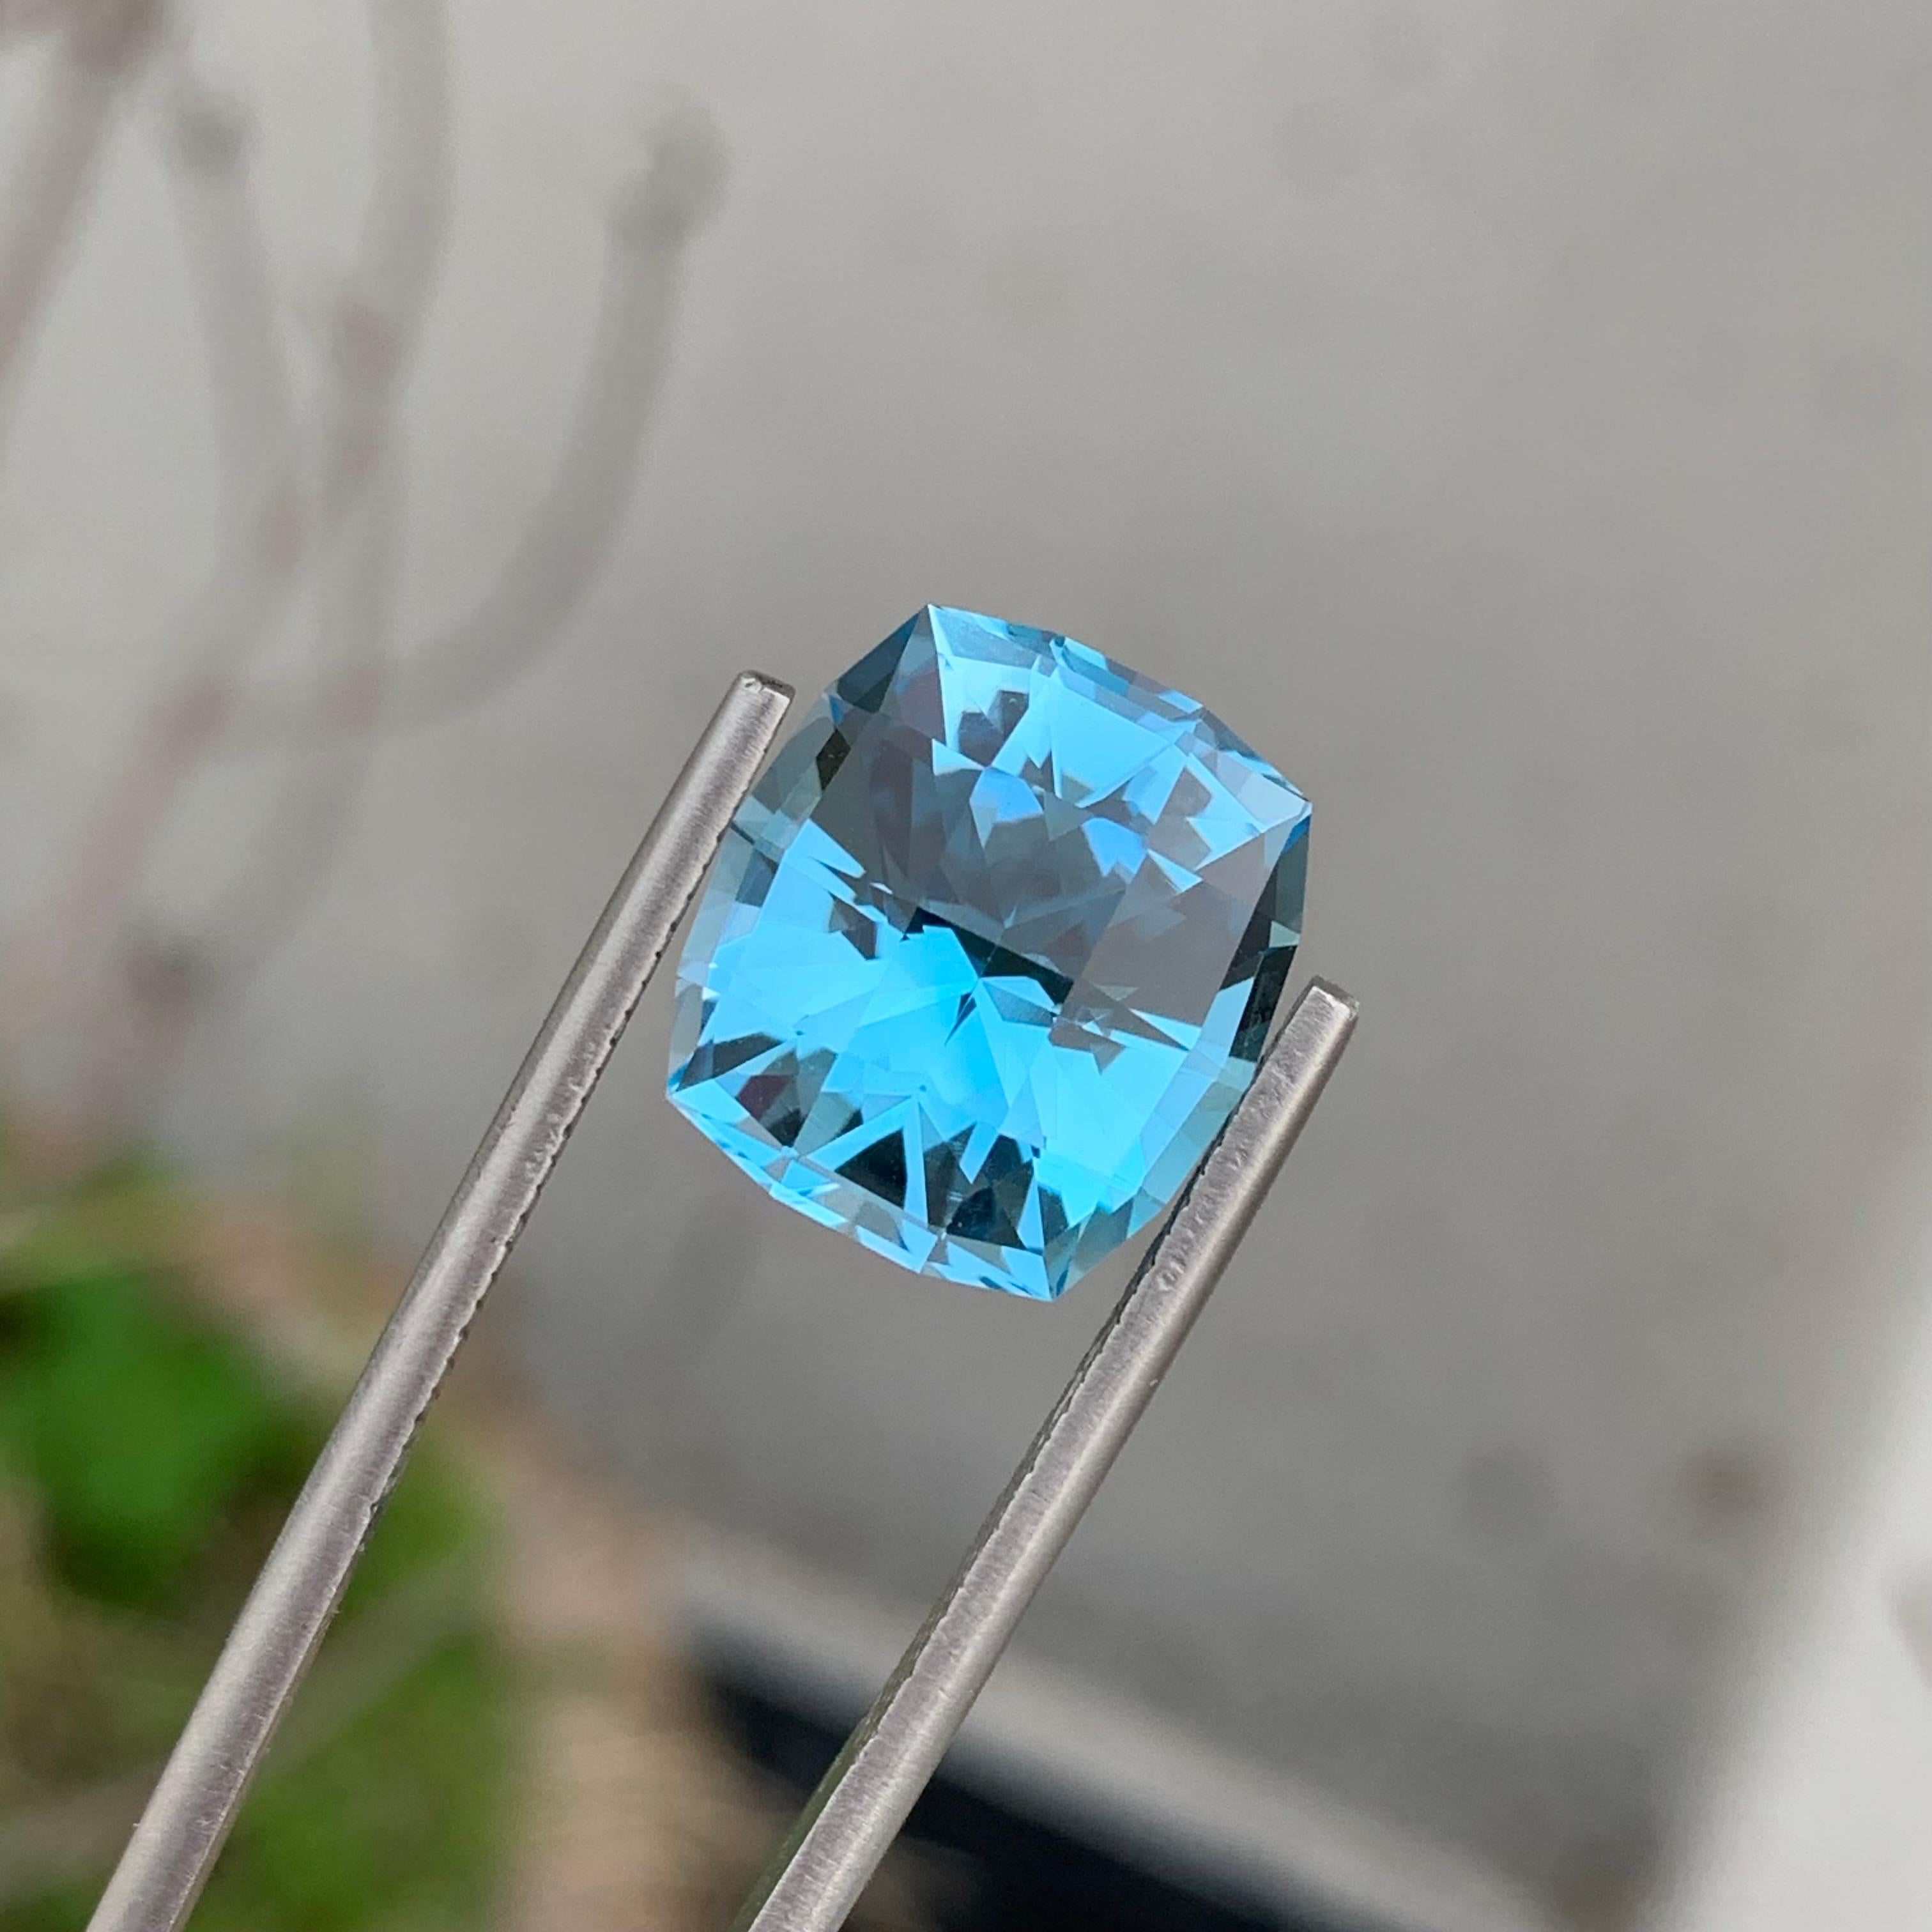 Mixed Cut 12.15 Carat Fancy Cut Faceted Sky Blue Topaz Gemstone For Jewellery Making  For Sale